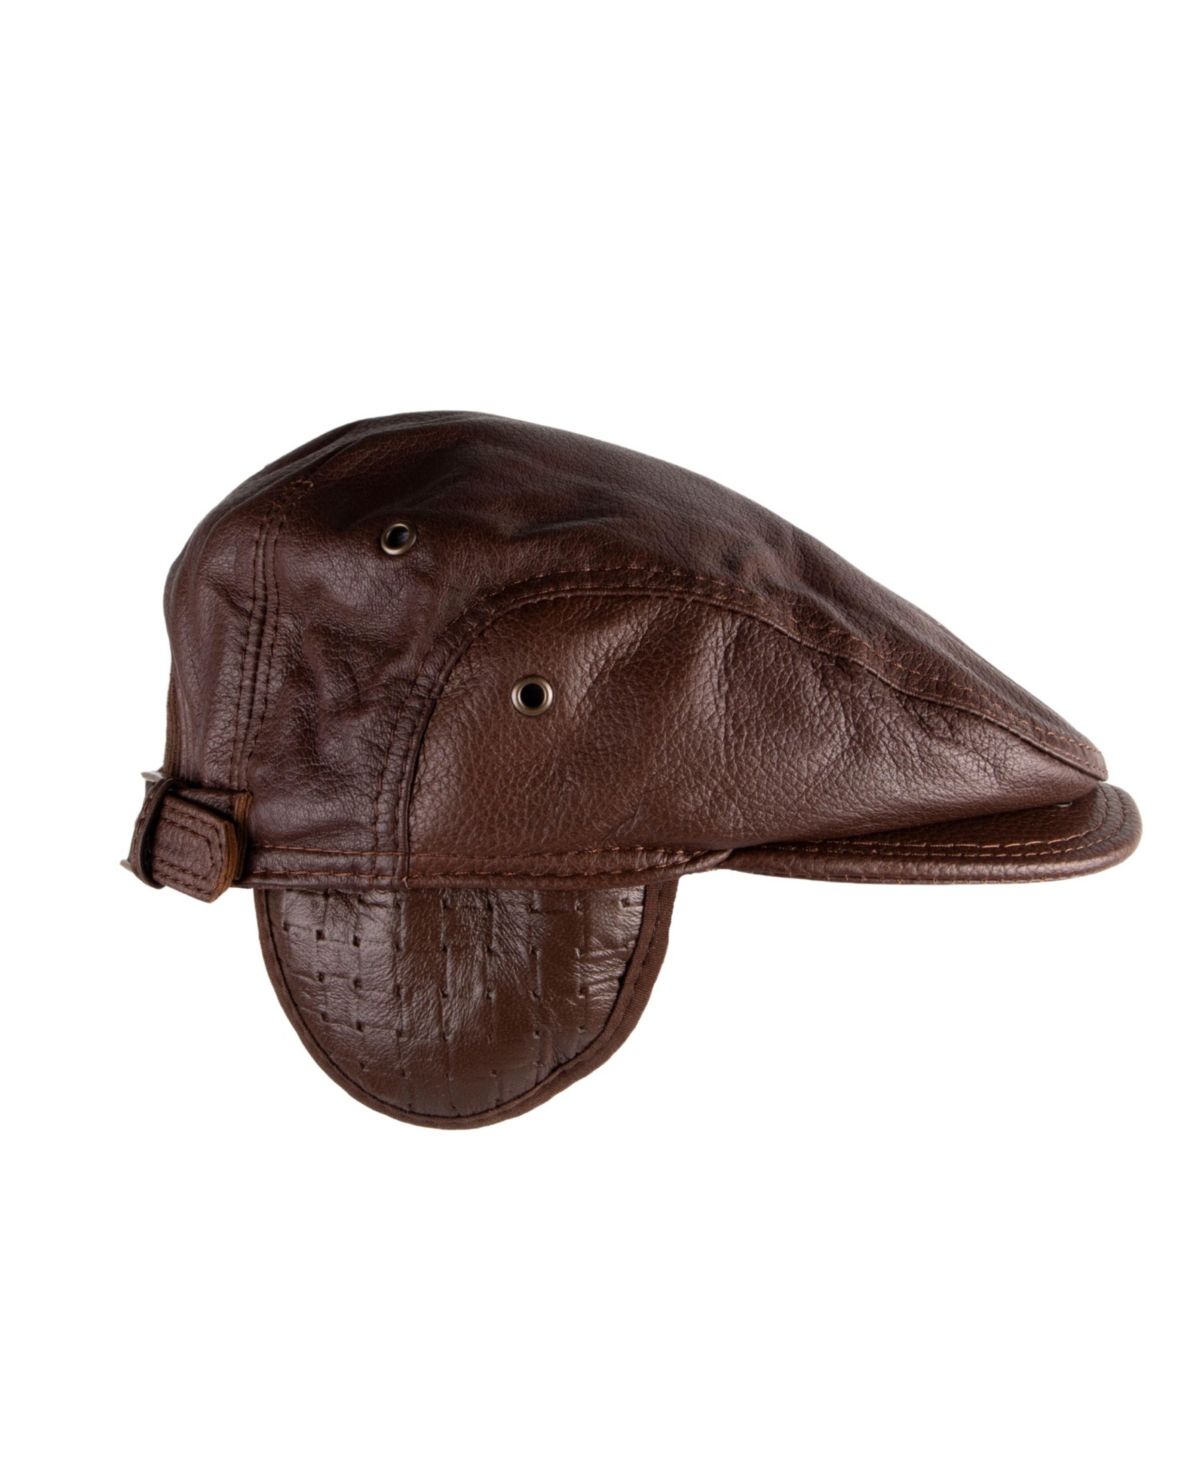 Warm Leather Ivy Hat - Chocolate